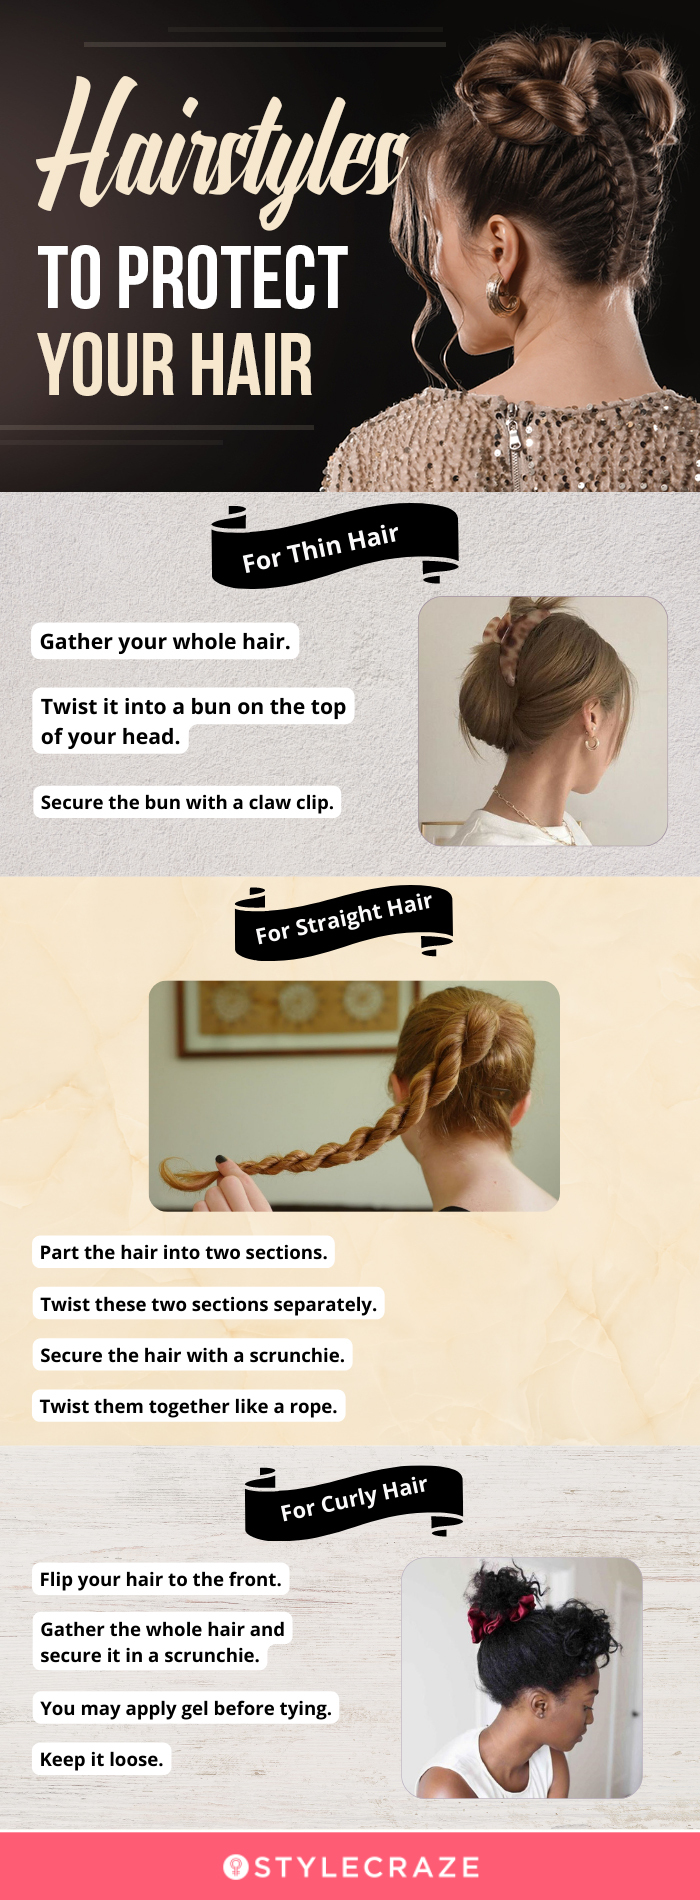 hairstyles to protect your hair (infographic)